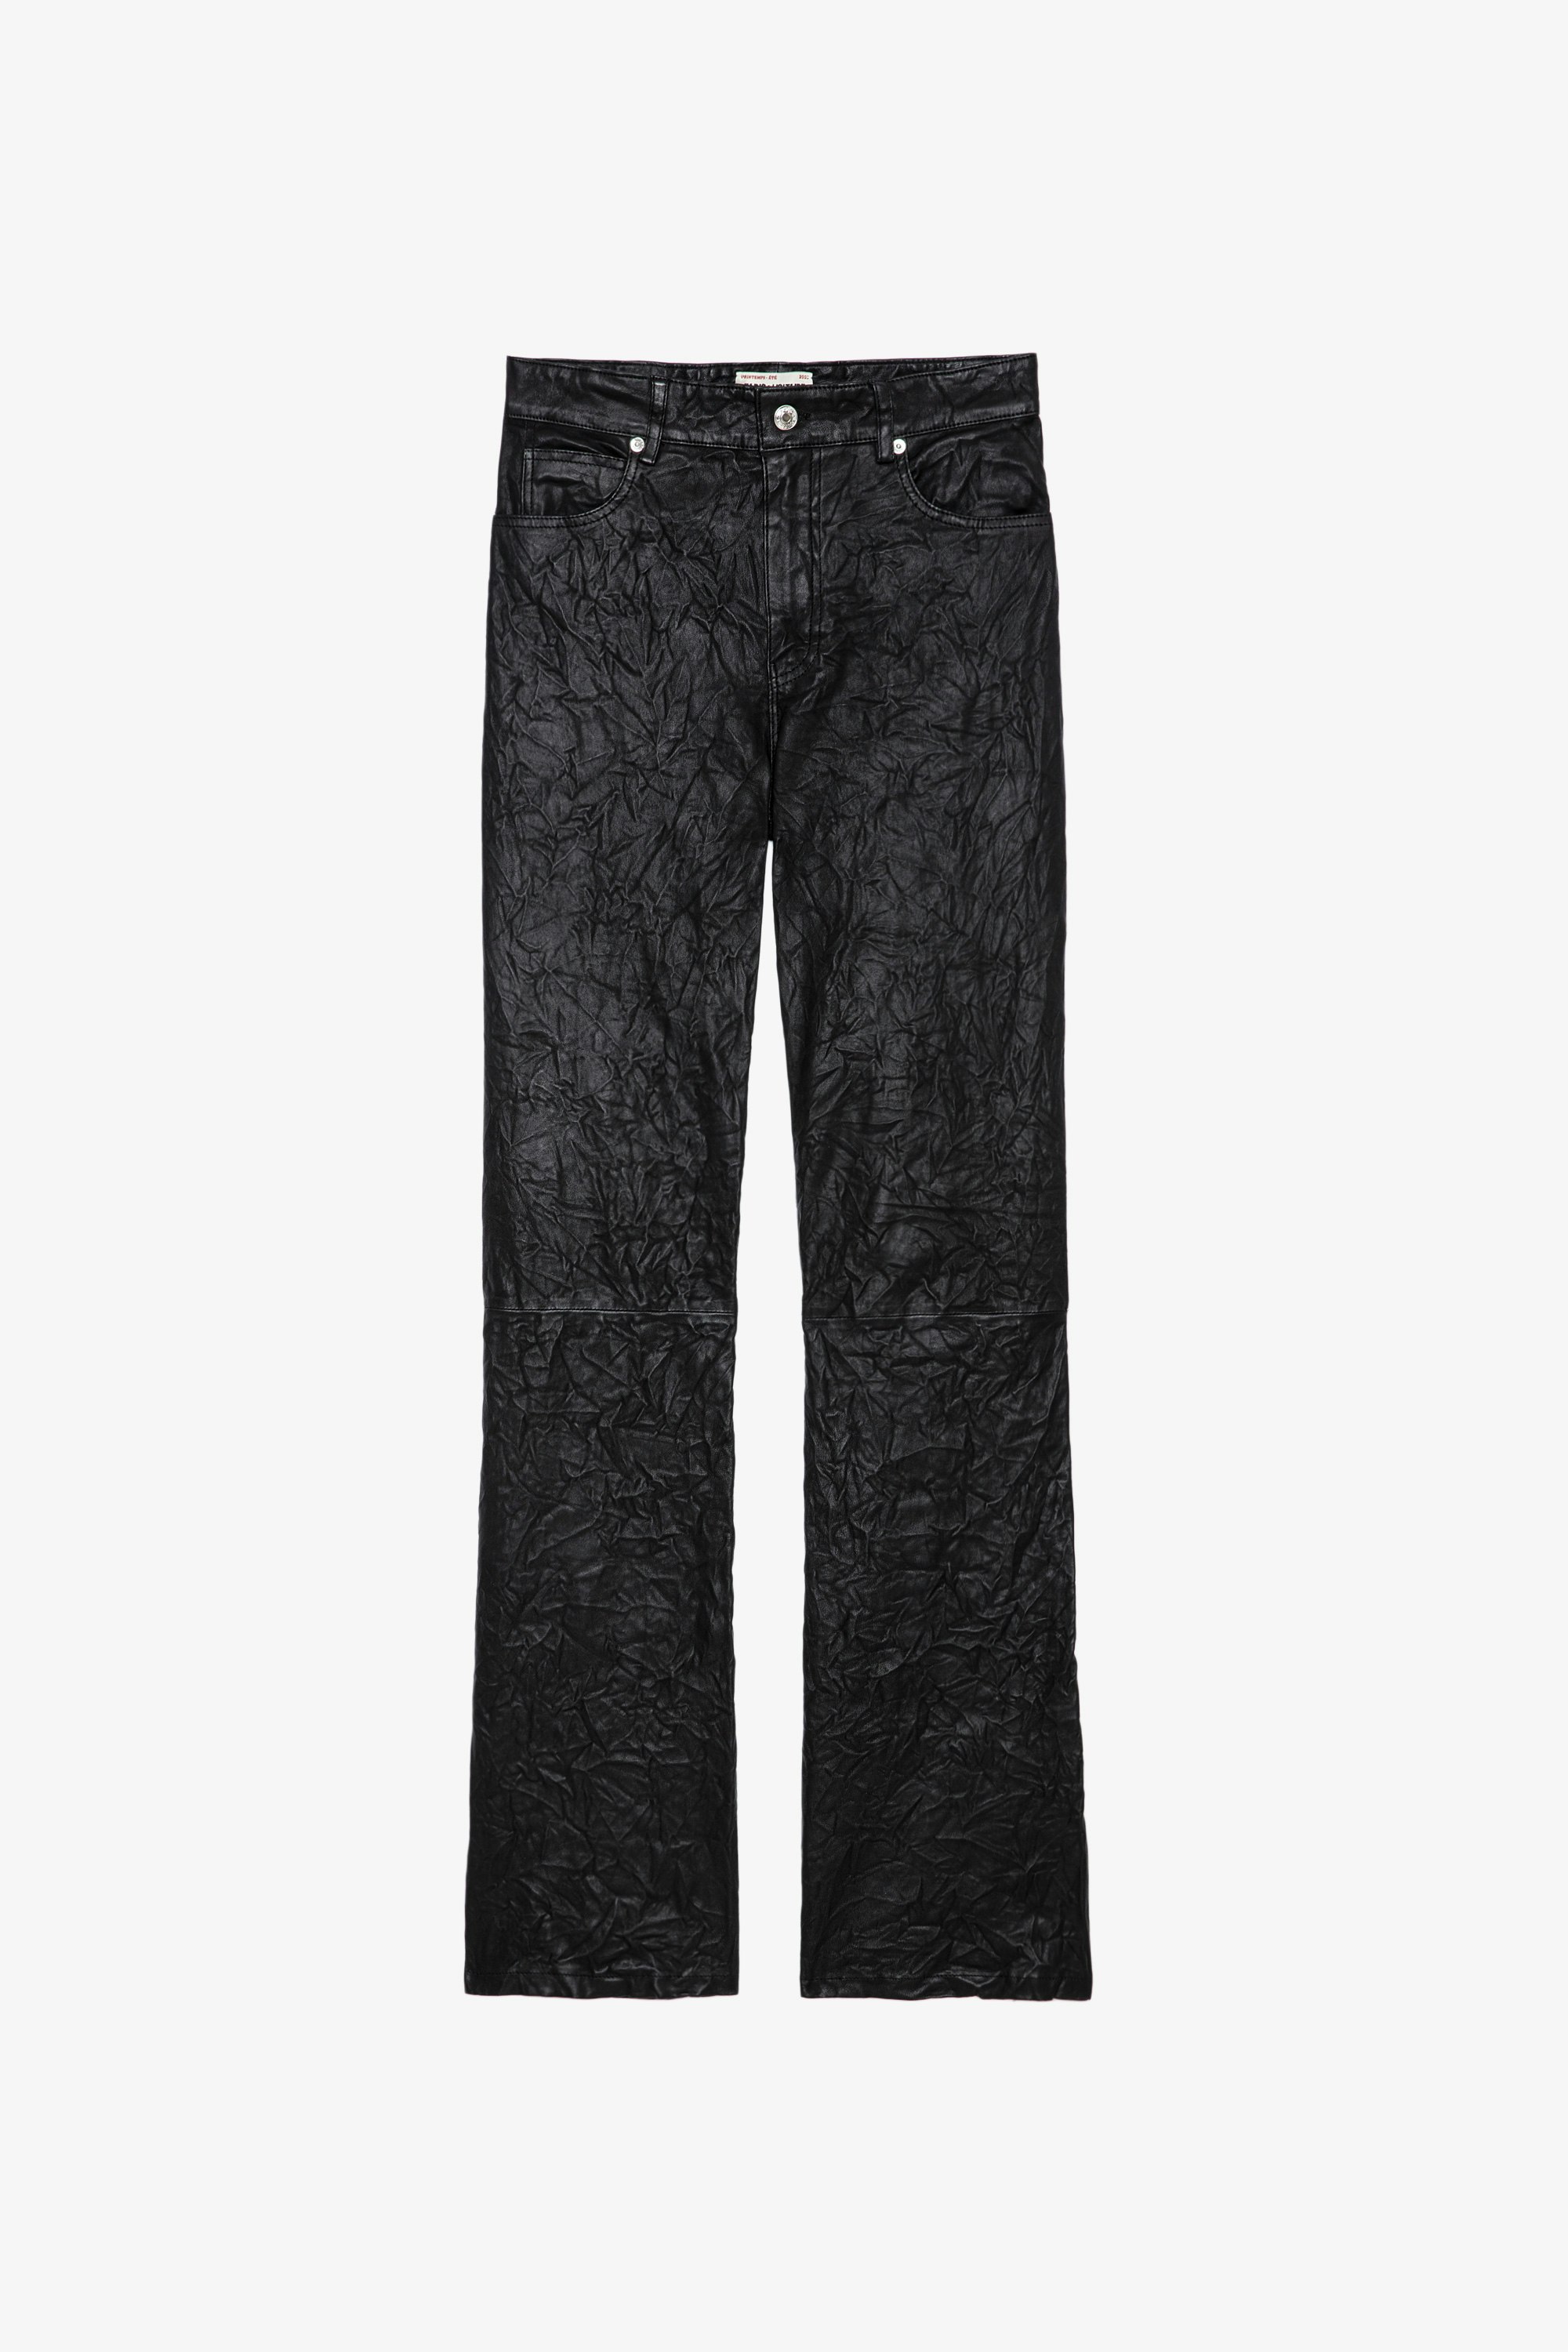 Evy クリンクル レザー パンツ Women’s flared trousers in black crinkled leather